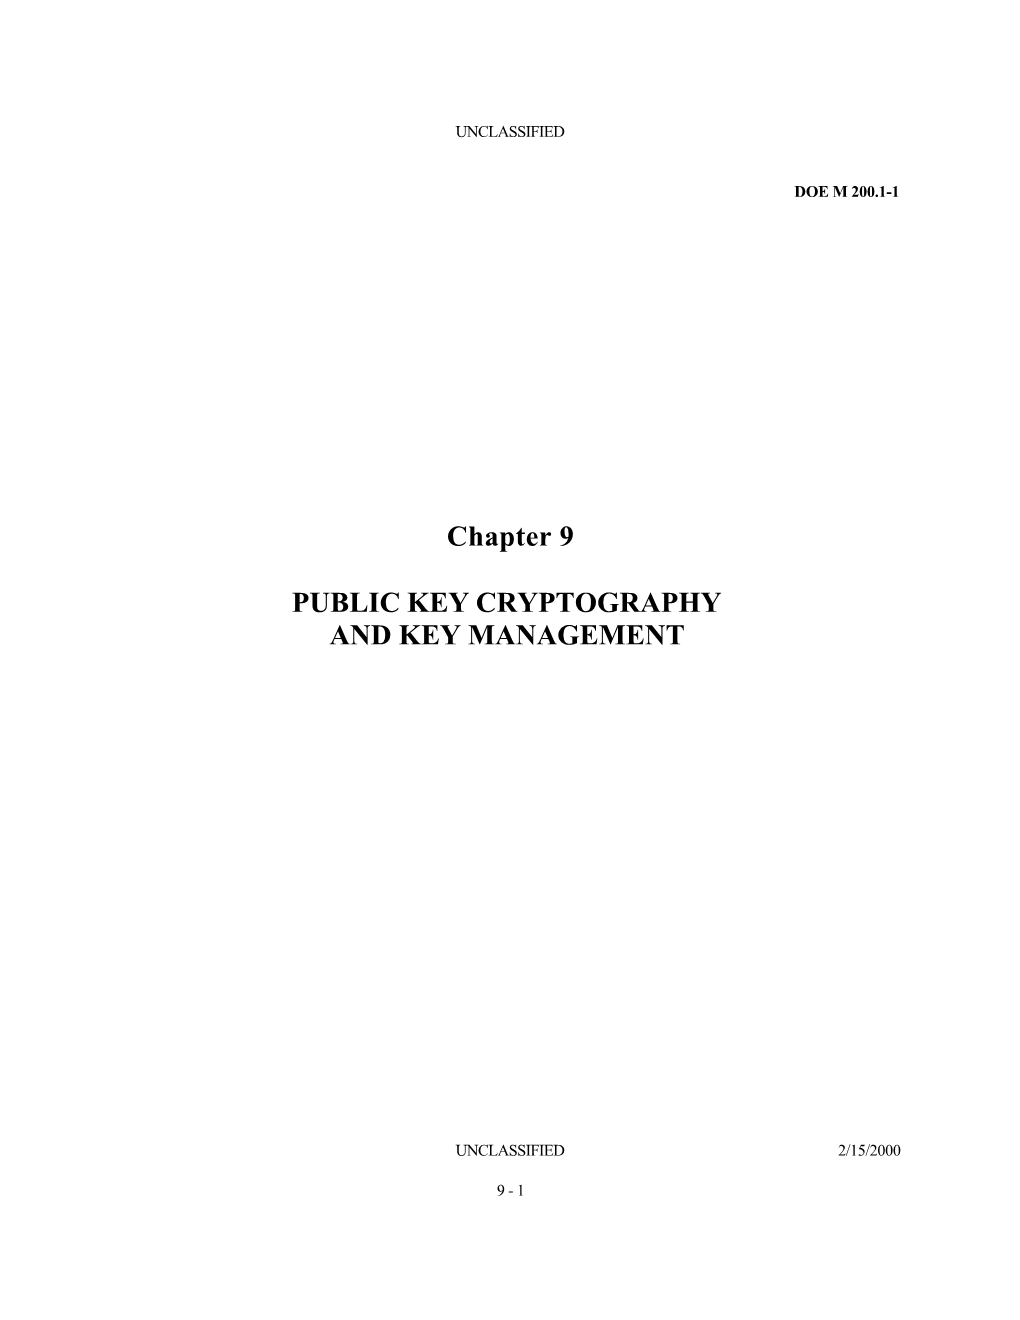 Chapter 9 PUBLIC KEY CRYPTOGRAPHY and KEY